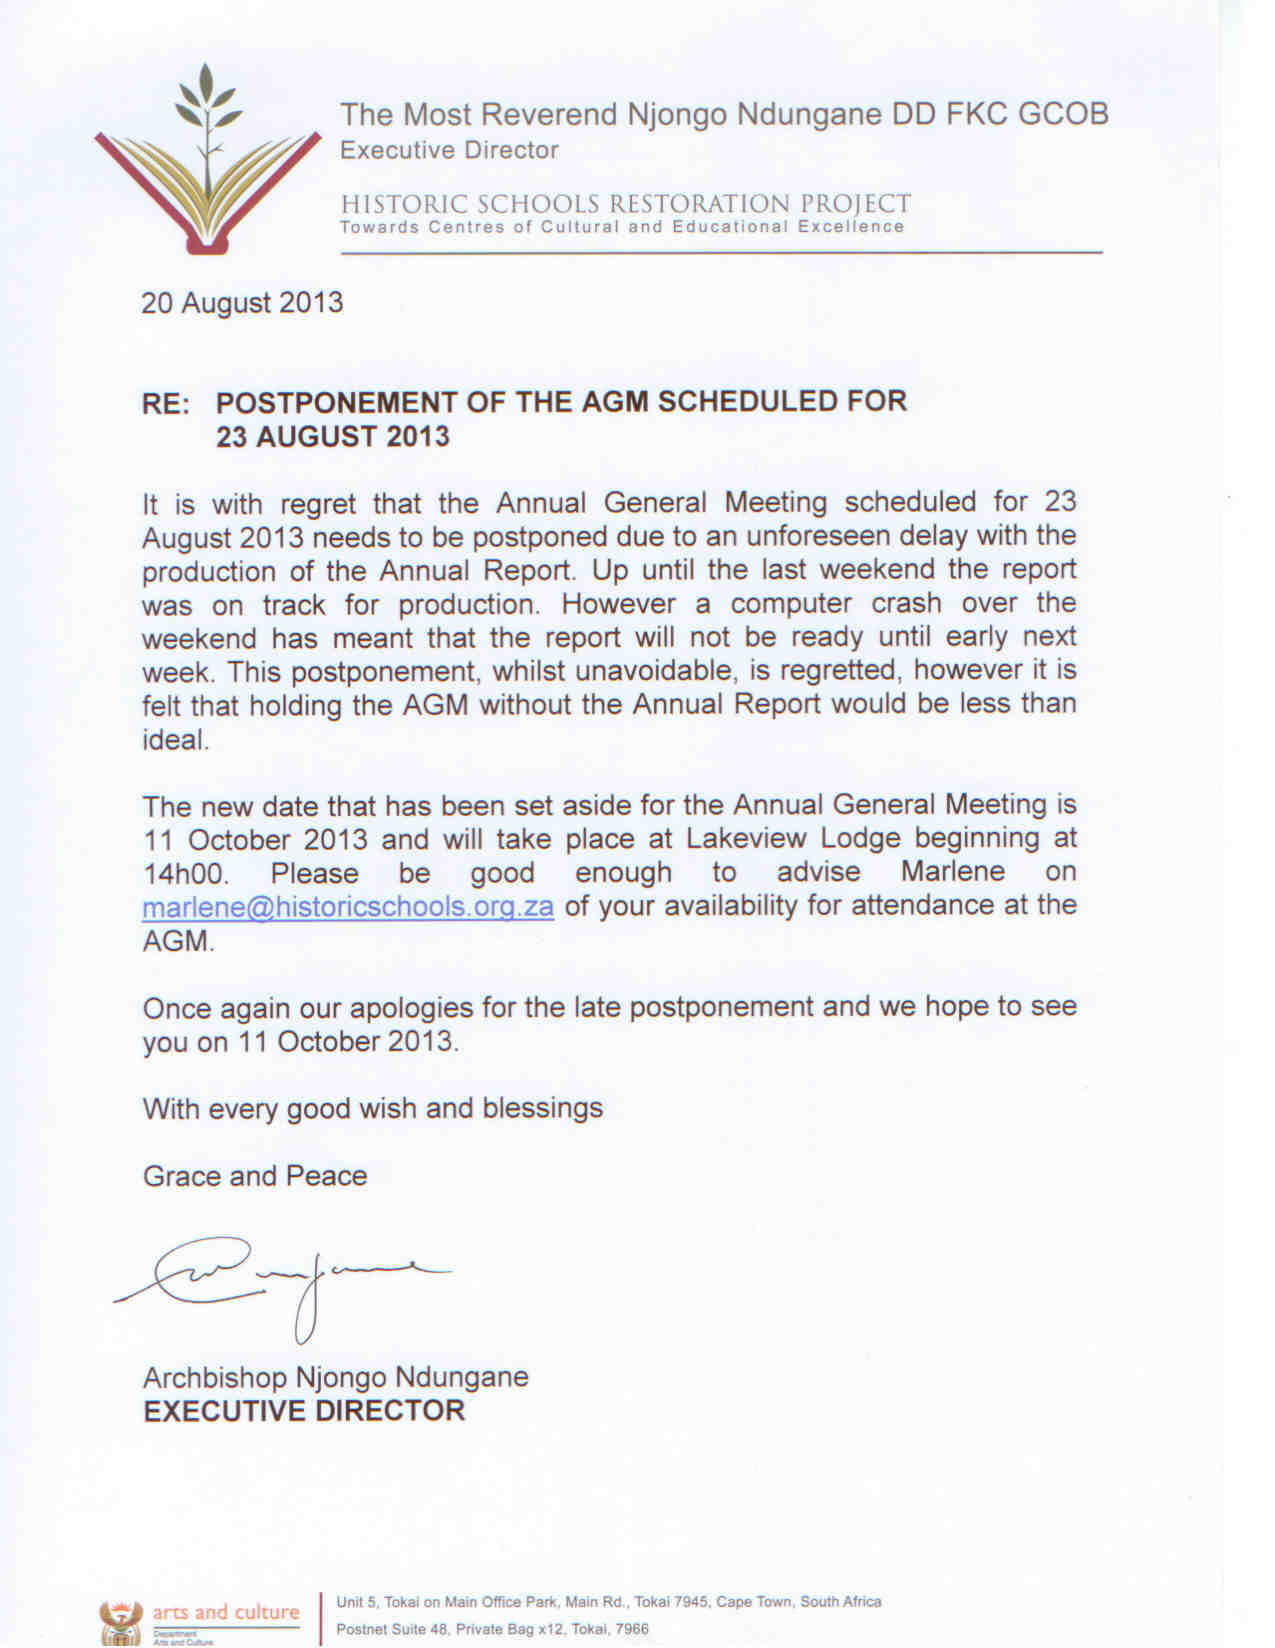 POSTPONEMENT OF AGM SCHEDULED FOR 23 AUGUST 2013